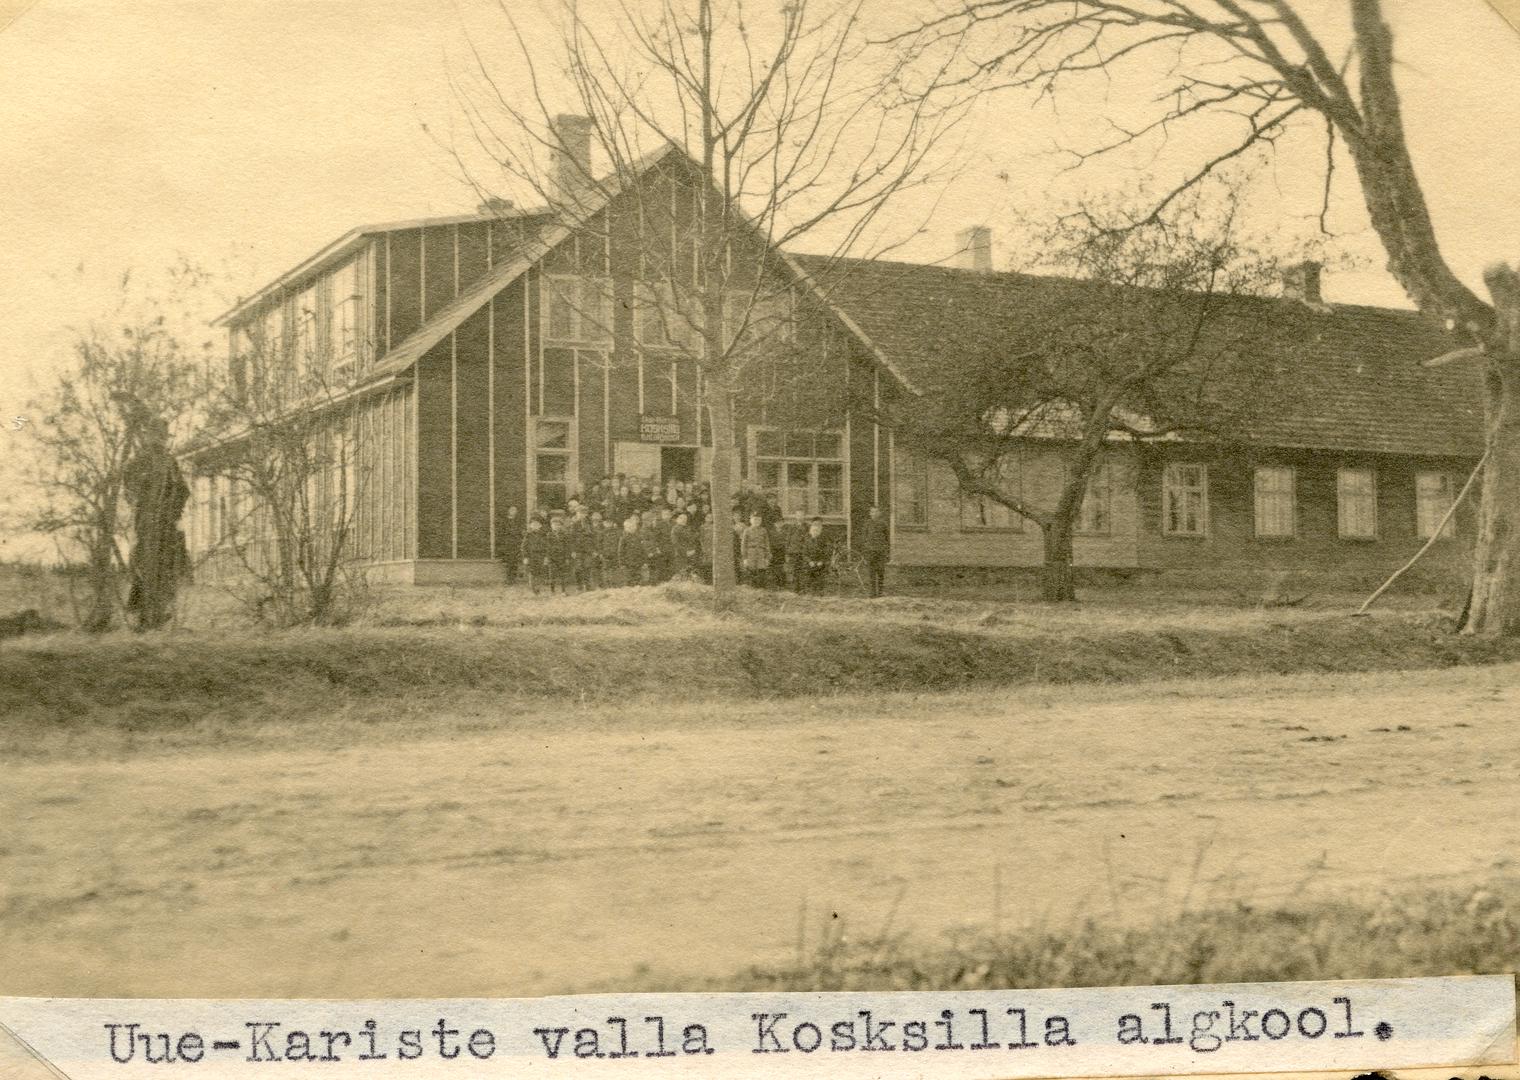 Kosksilla 6-kl During the construction of the new school building